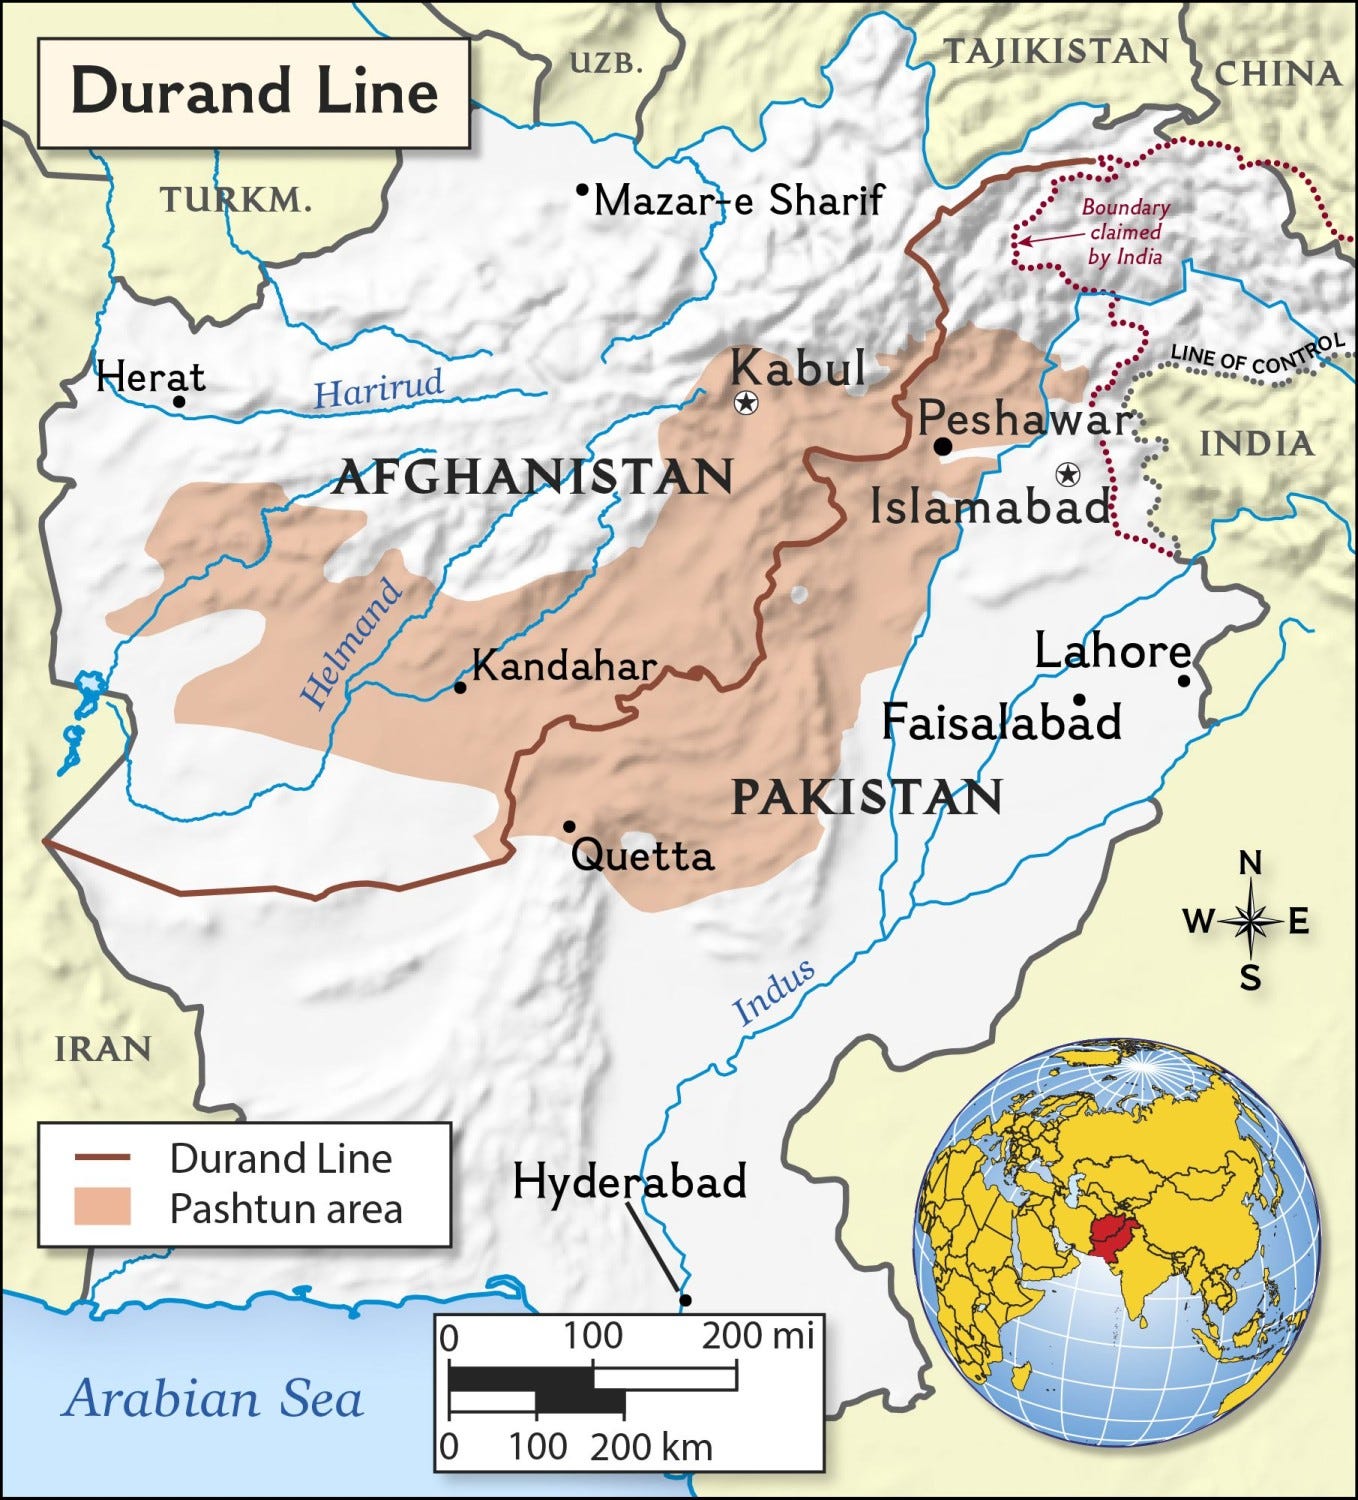 Map of Afghanistan and Pakistan showing the Durand Line that is the border between the states, as well as shaded area of the Pashtun people which is divided by this line.